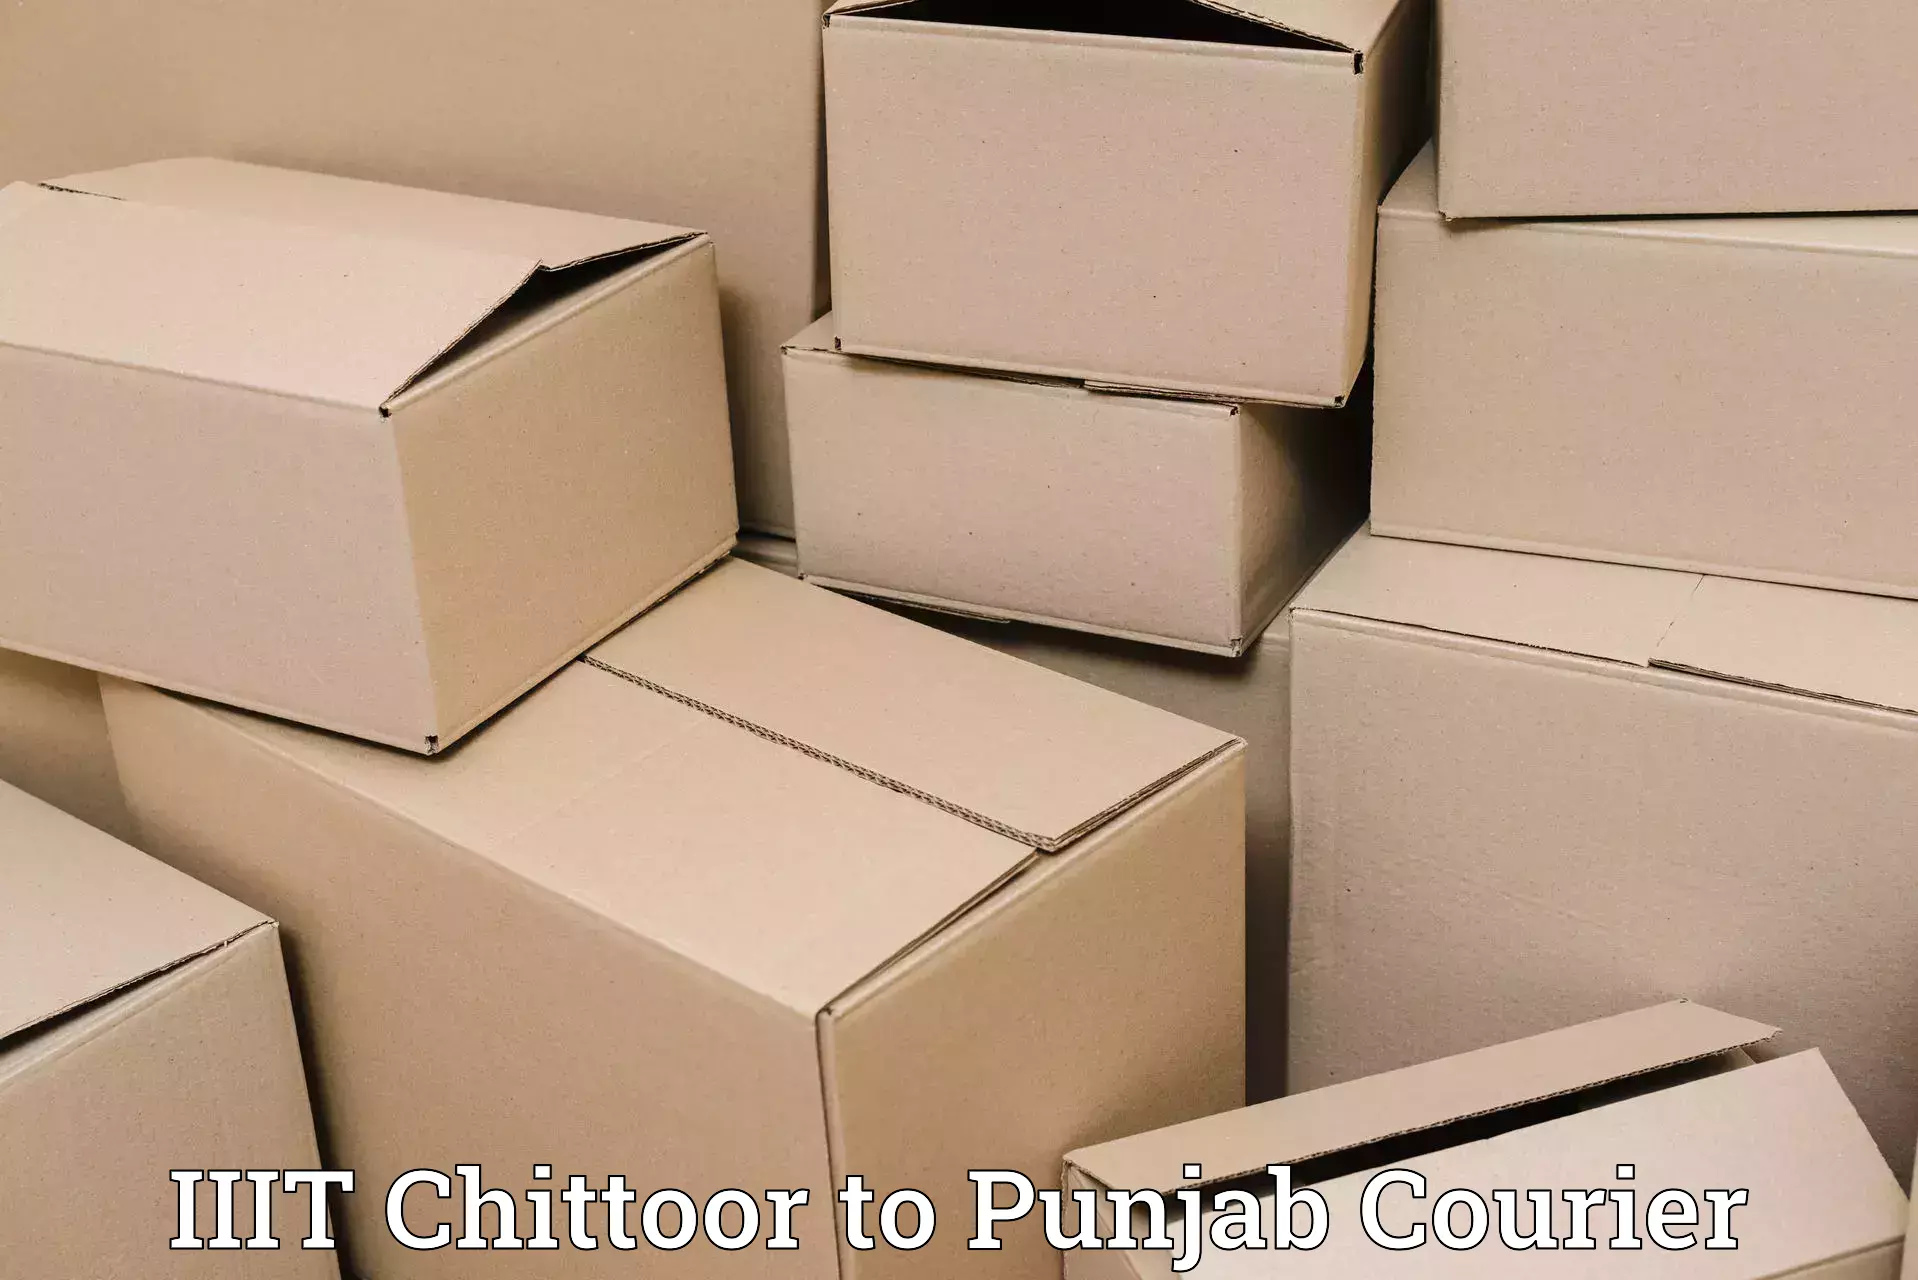 Customer-oriented courier services IIIT Chittoor to Punjab